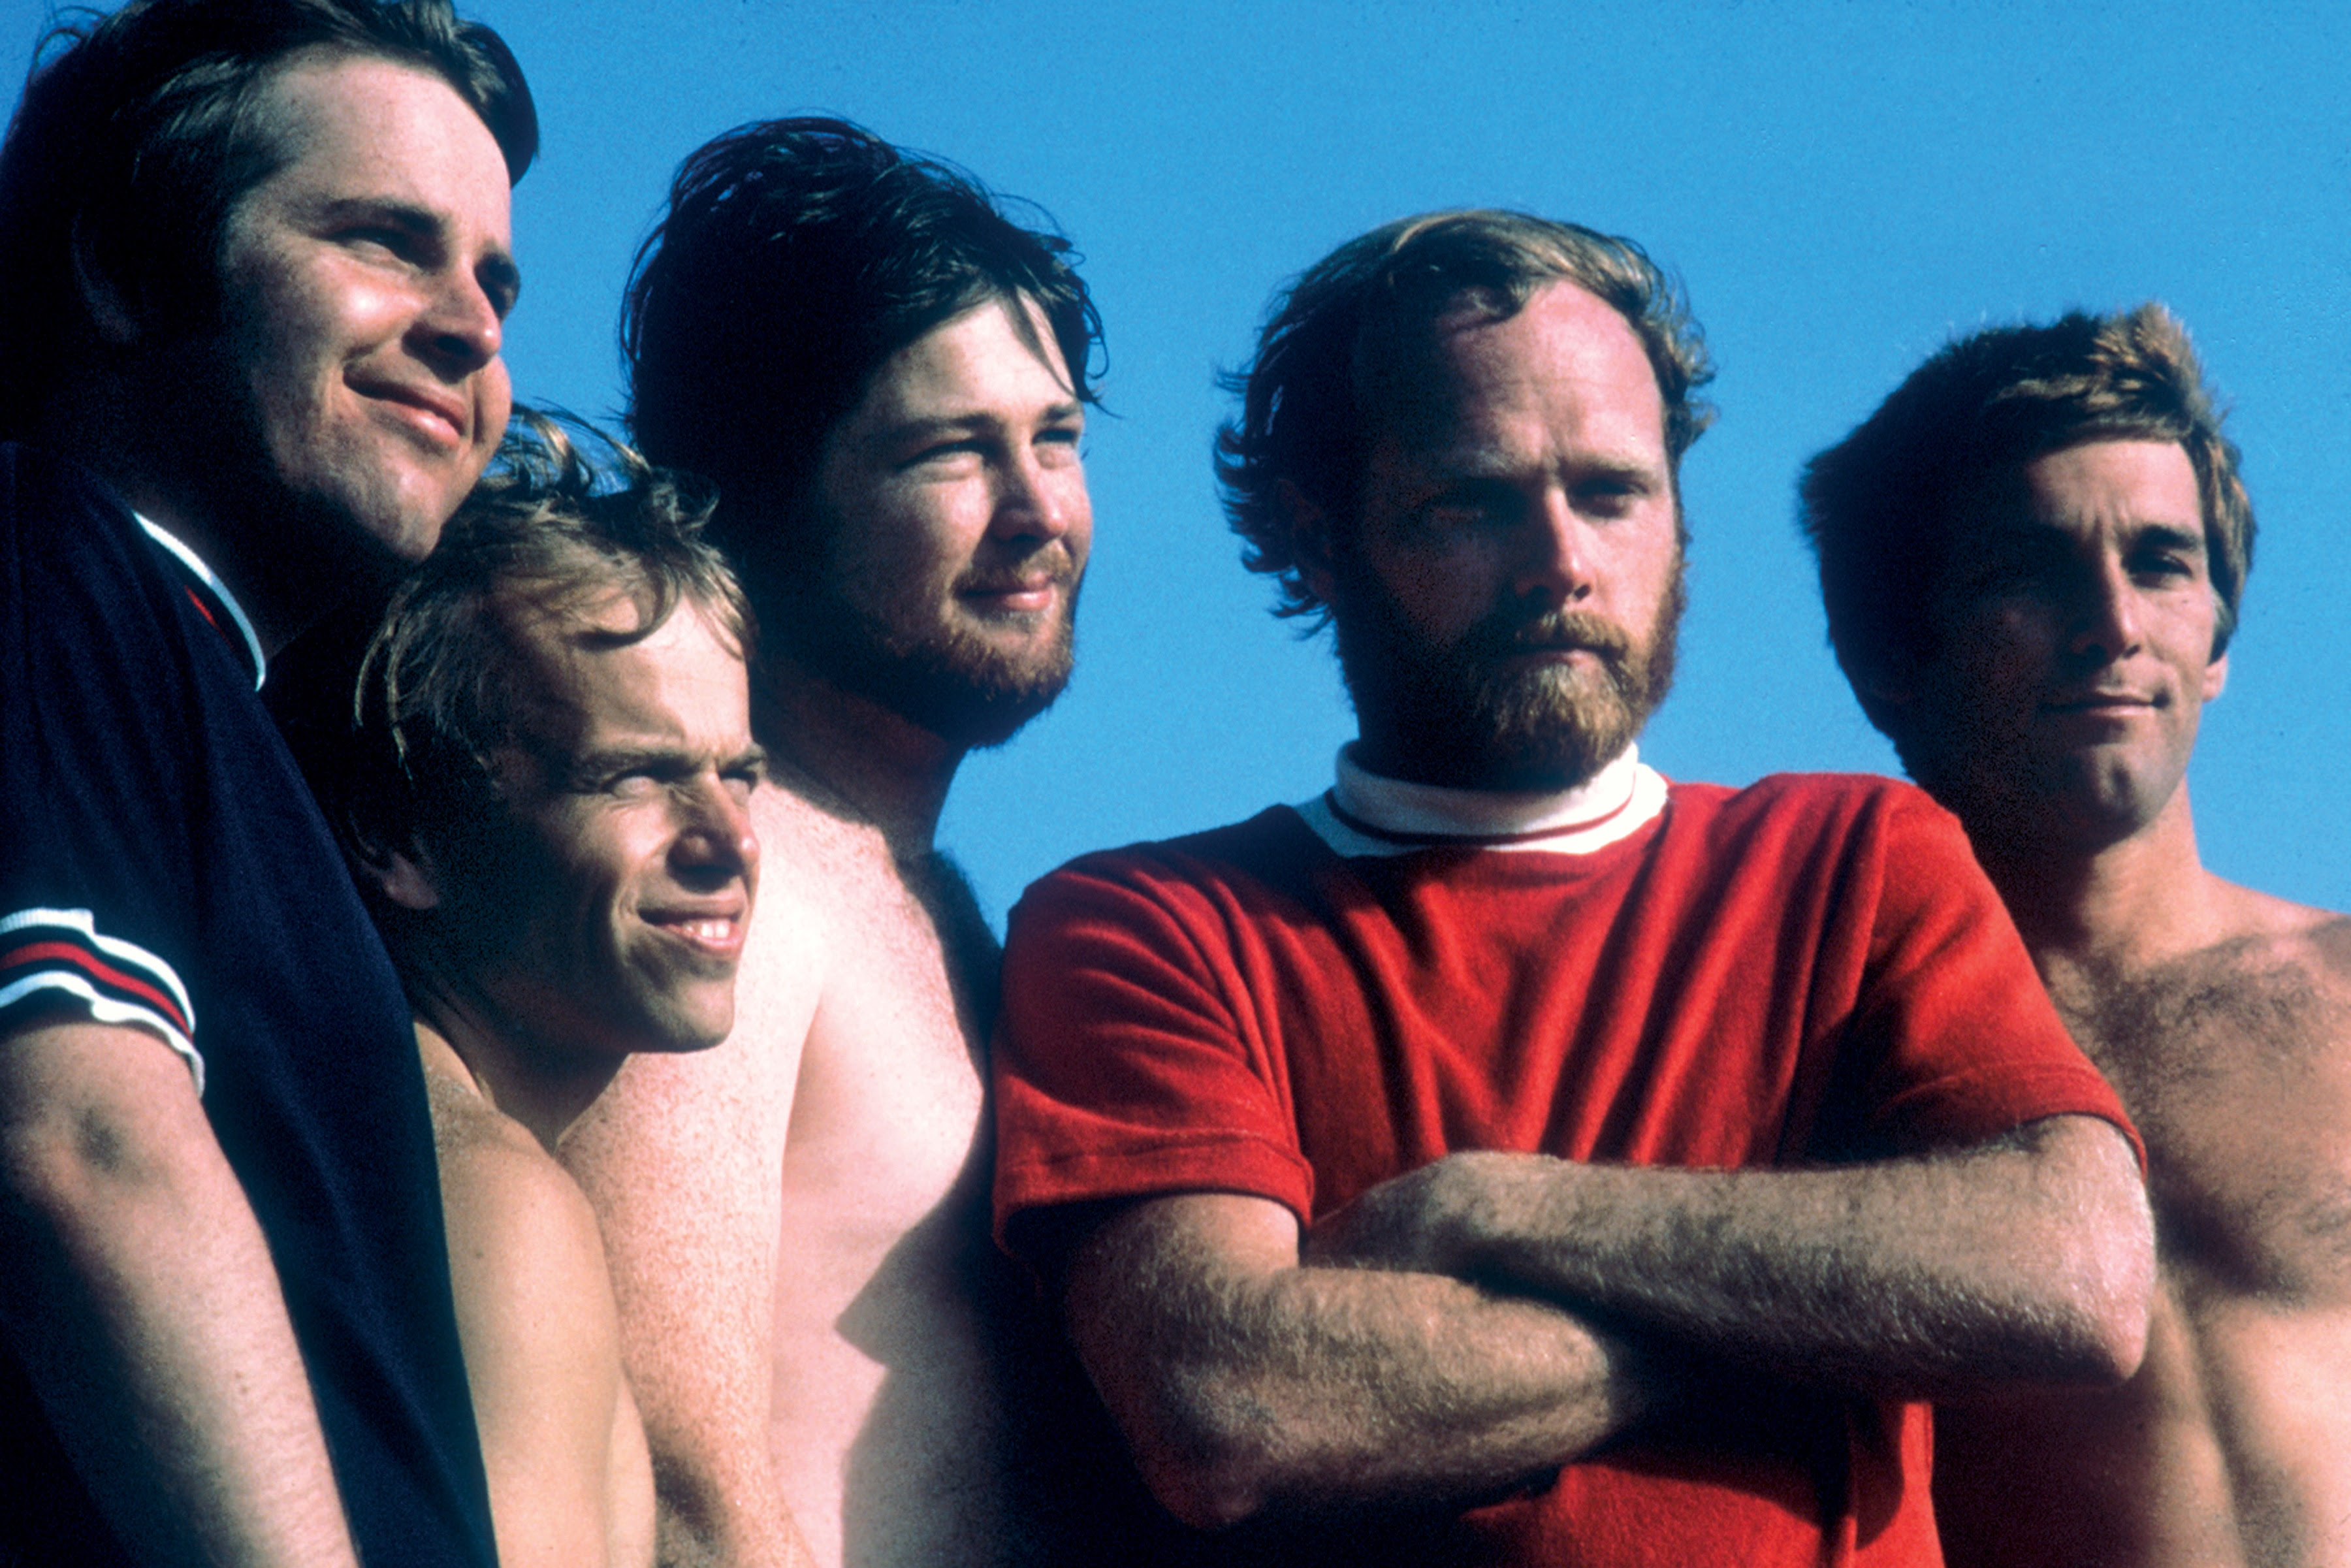 The Beach Boys Release Remastered + Expanded Edition Of "Sounds Of Summer - The Very Best Of The Beach Boys" And Return Of "Good Vibrations: The Beach Boys Channel"